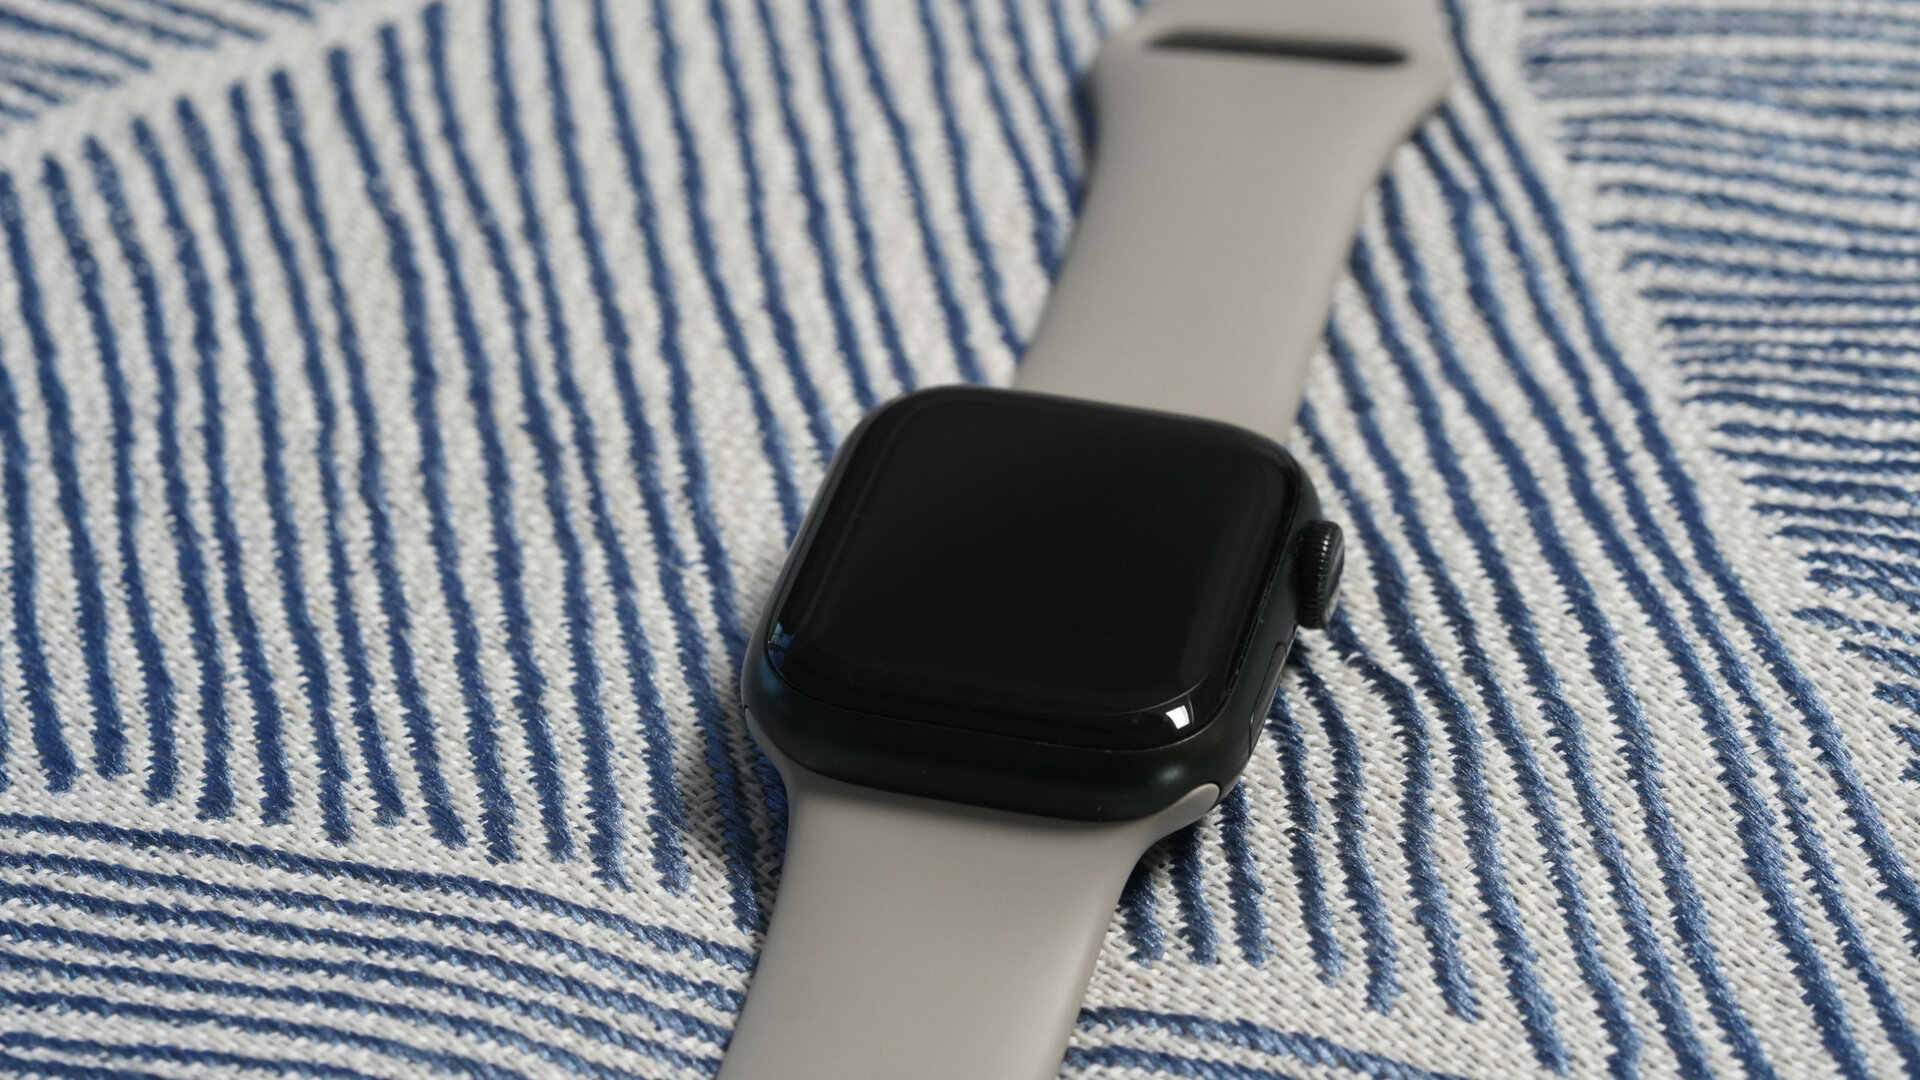 An Apple Watch Series 7 rests on a blue and gray patterned chair.